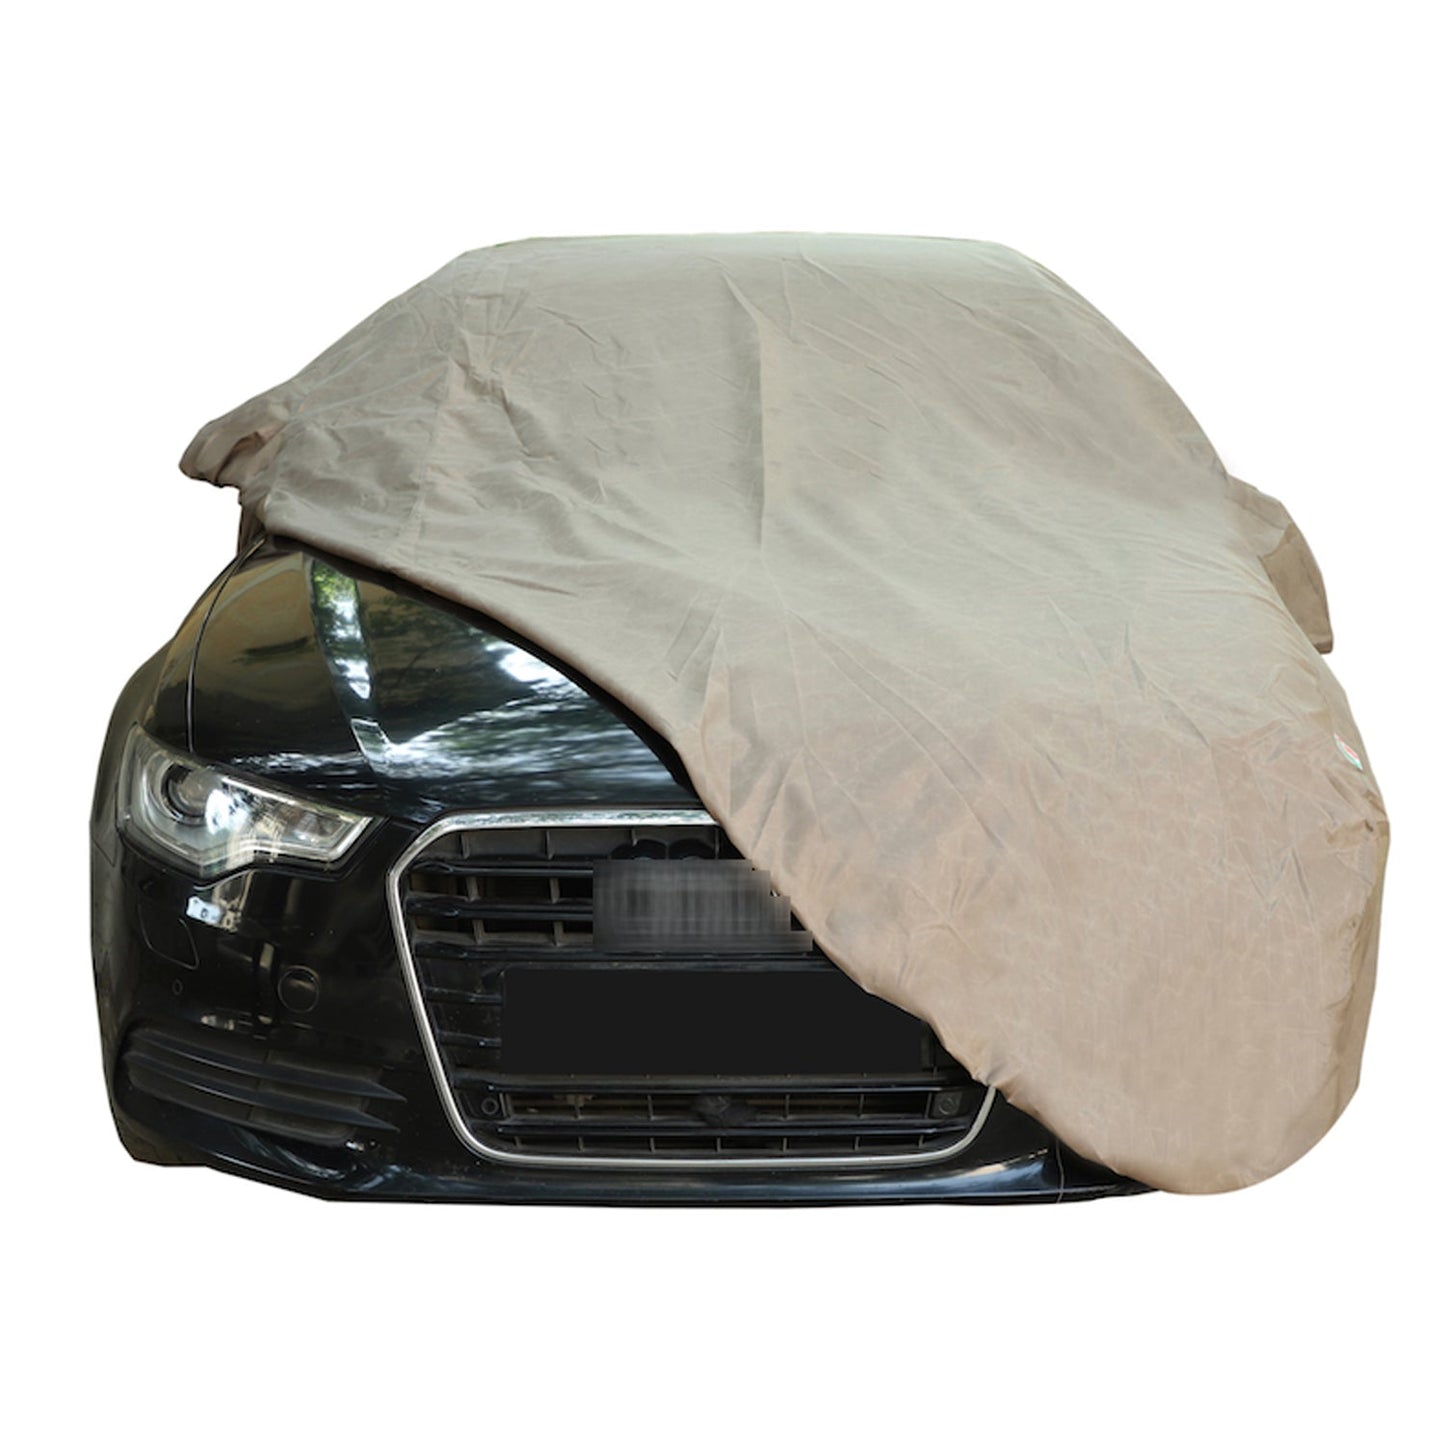 Oshotto Brown 100% Waterproof Car Body Cover with Mirror Pockets For Range Rover Velar